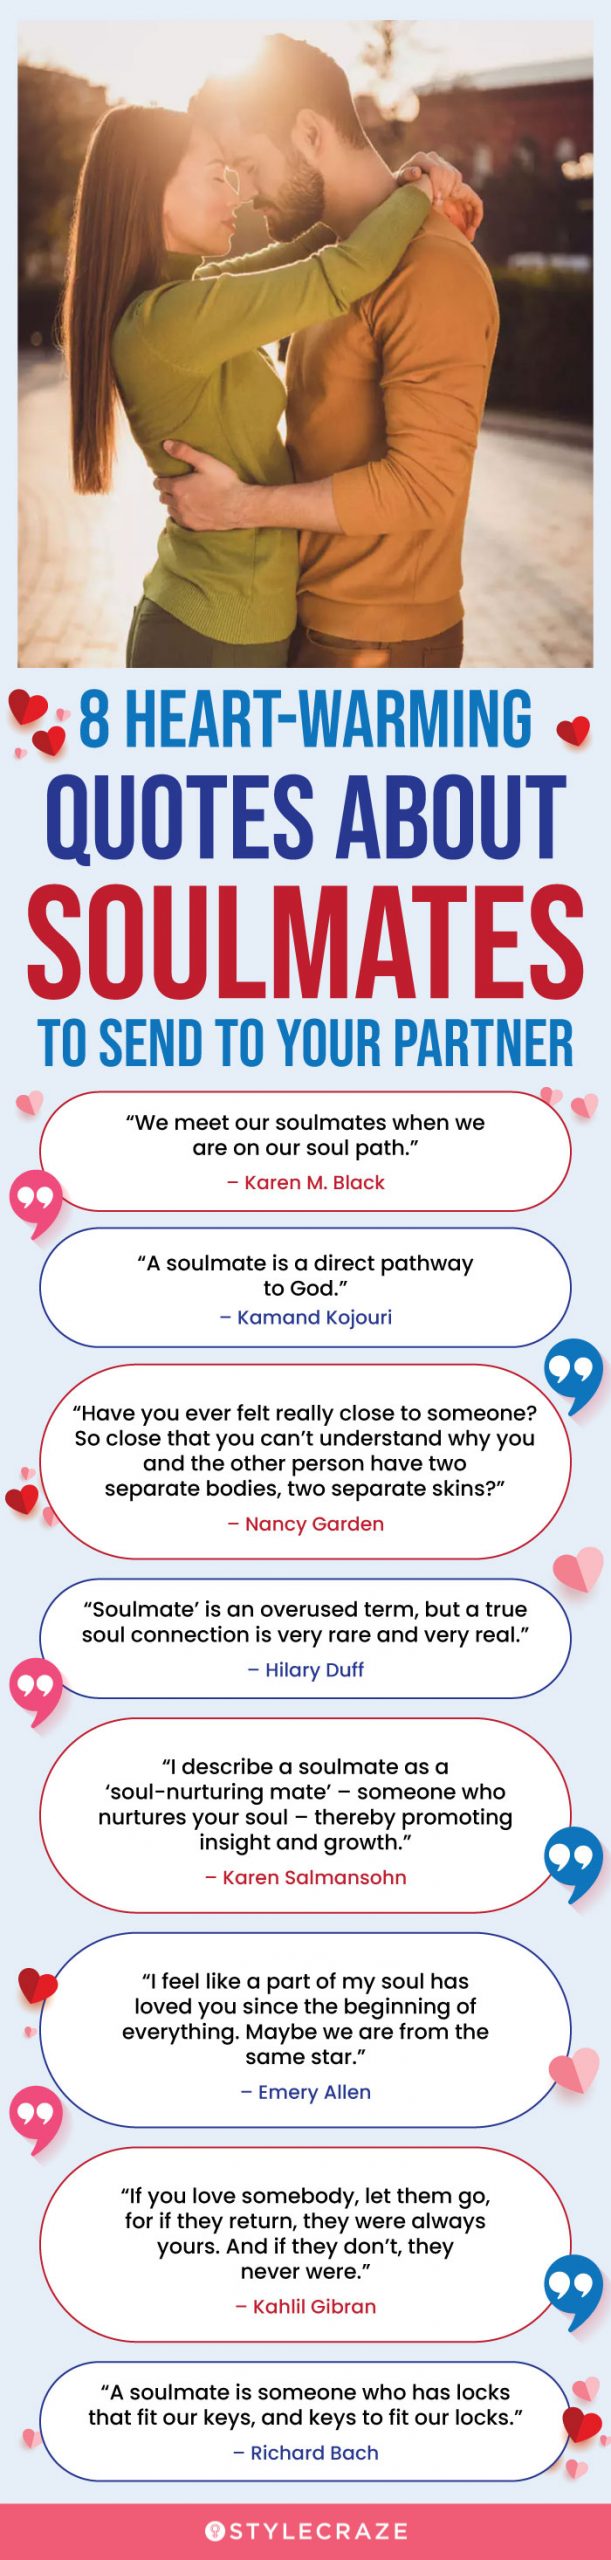 8 heart warming quotes about soulmates to send to your partner (infographic)